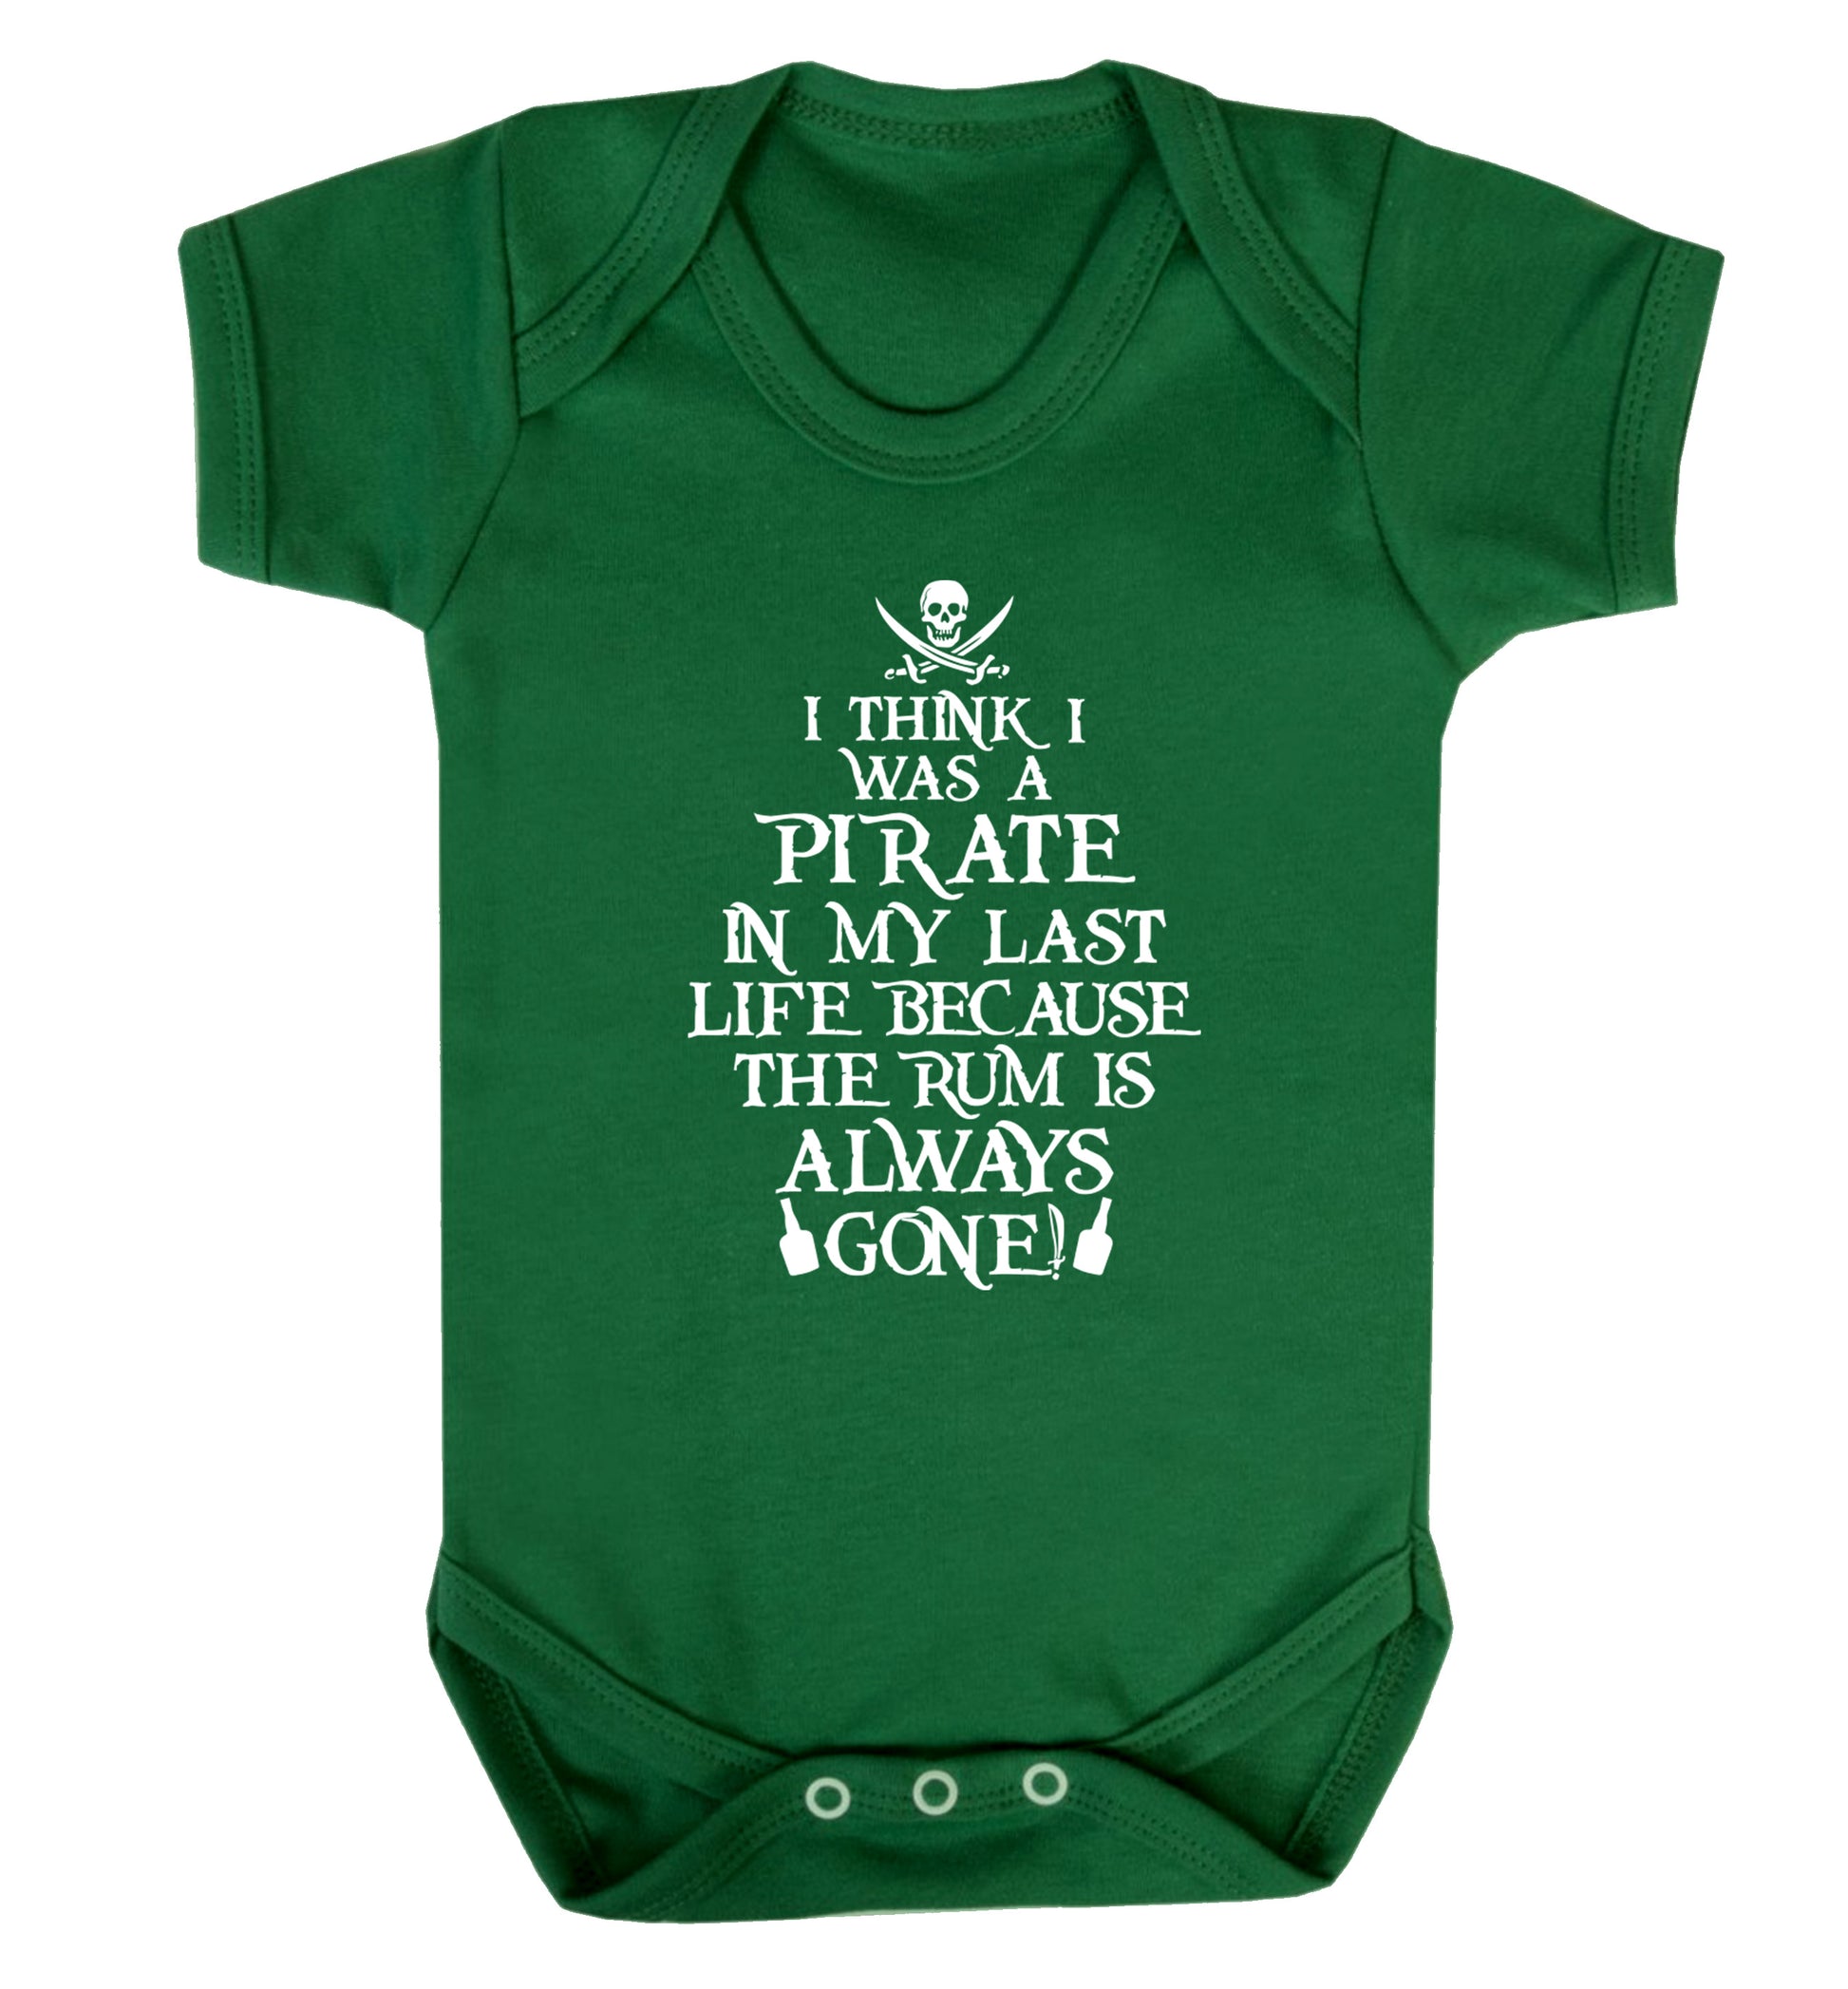 I think I was a pirate in my past life because the rum is always gone! Baby Vest green 18-24 months